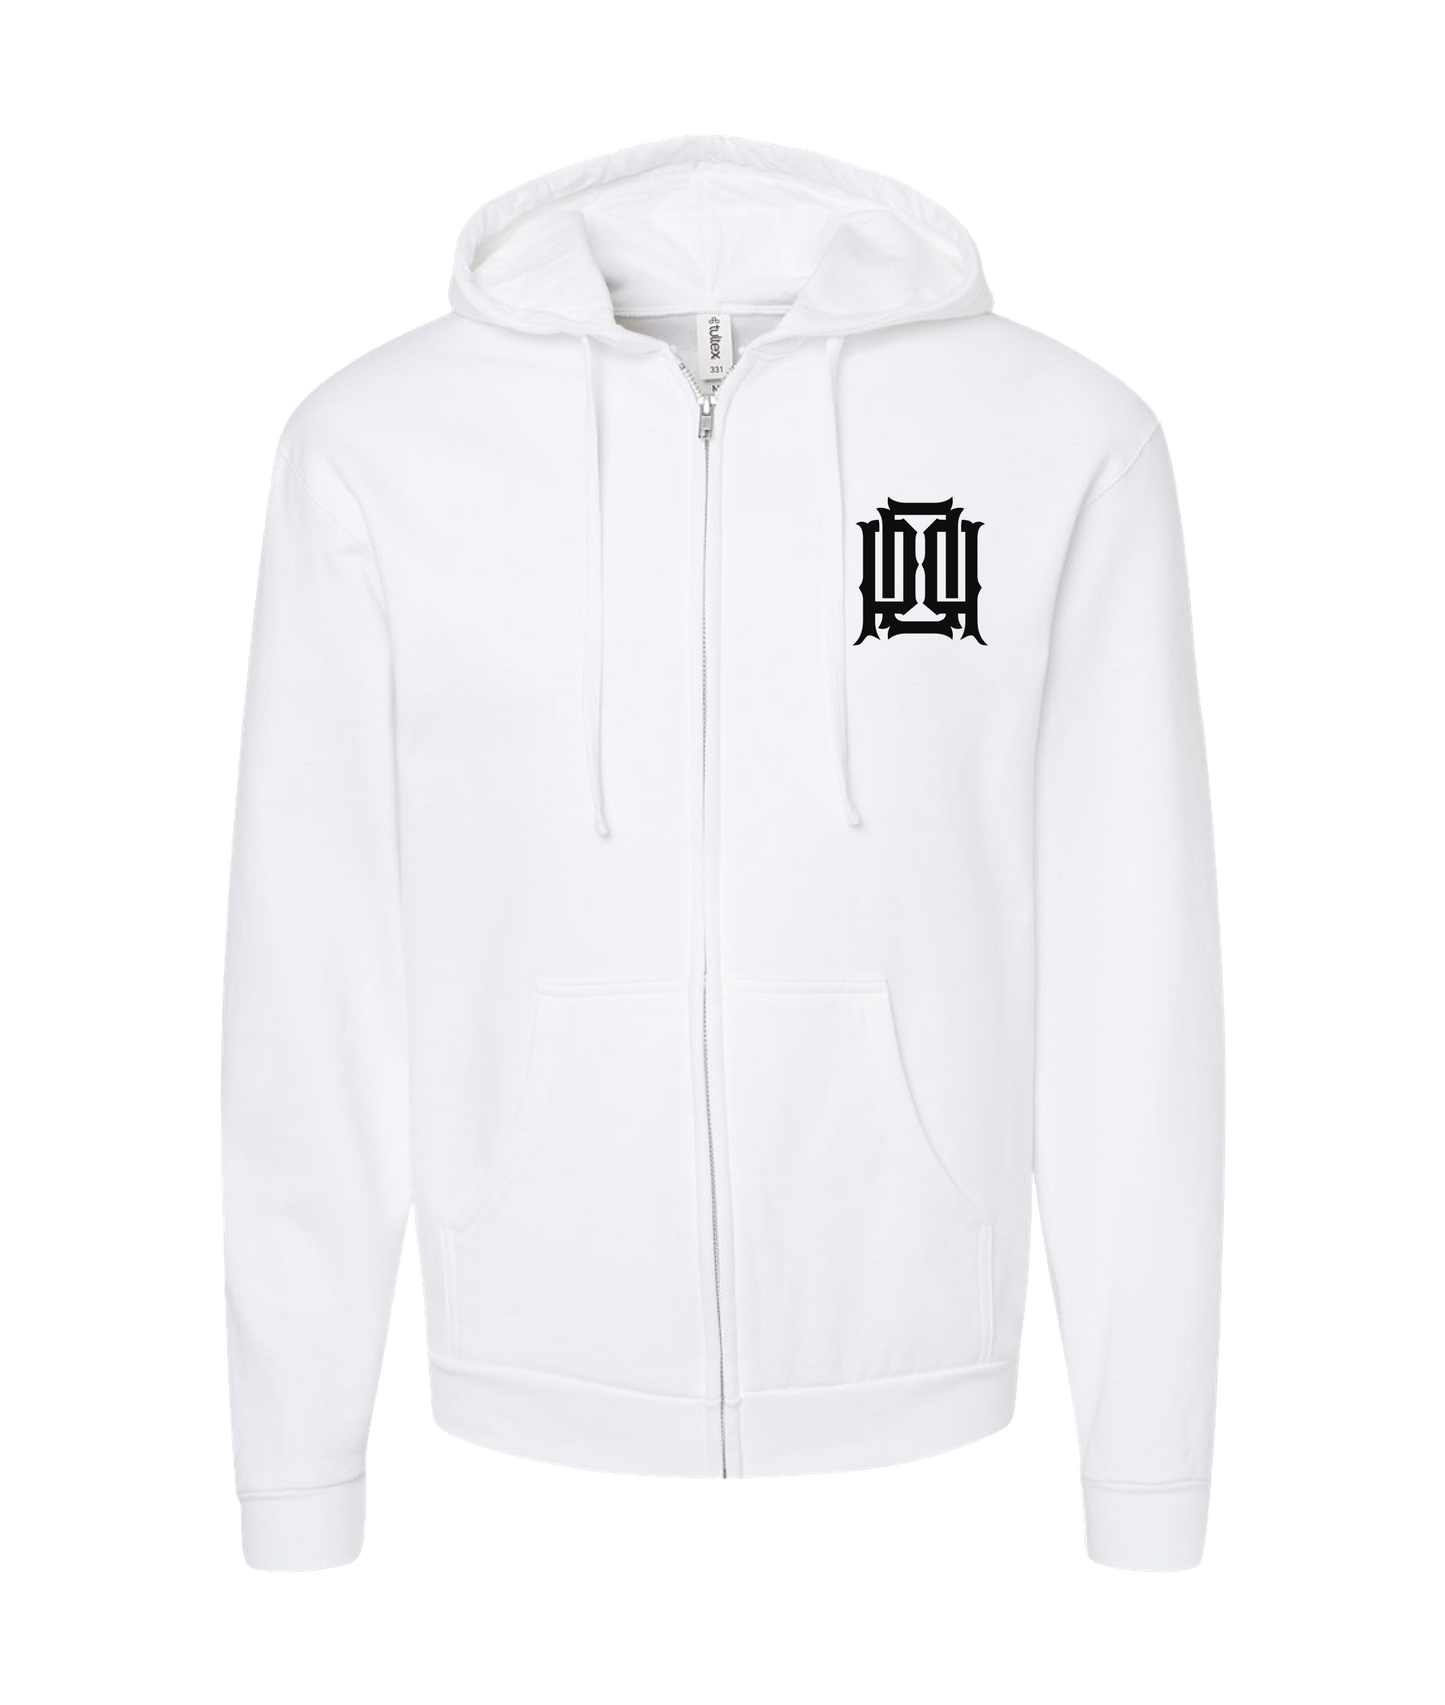 Plates Over Pints - LOGO 2 - White Zip Up Hoodie